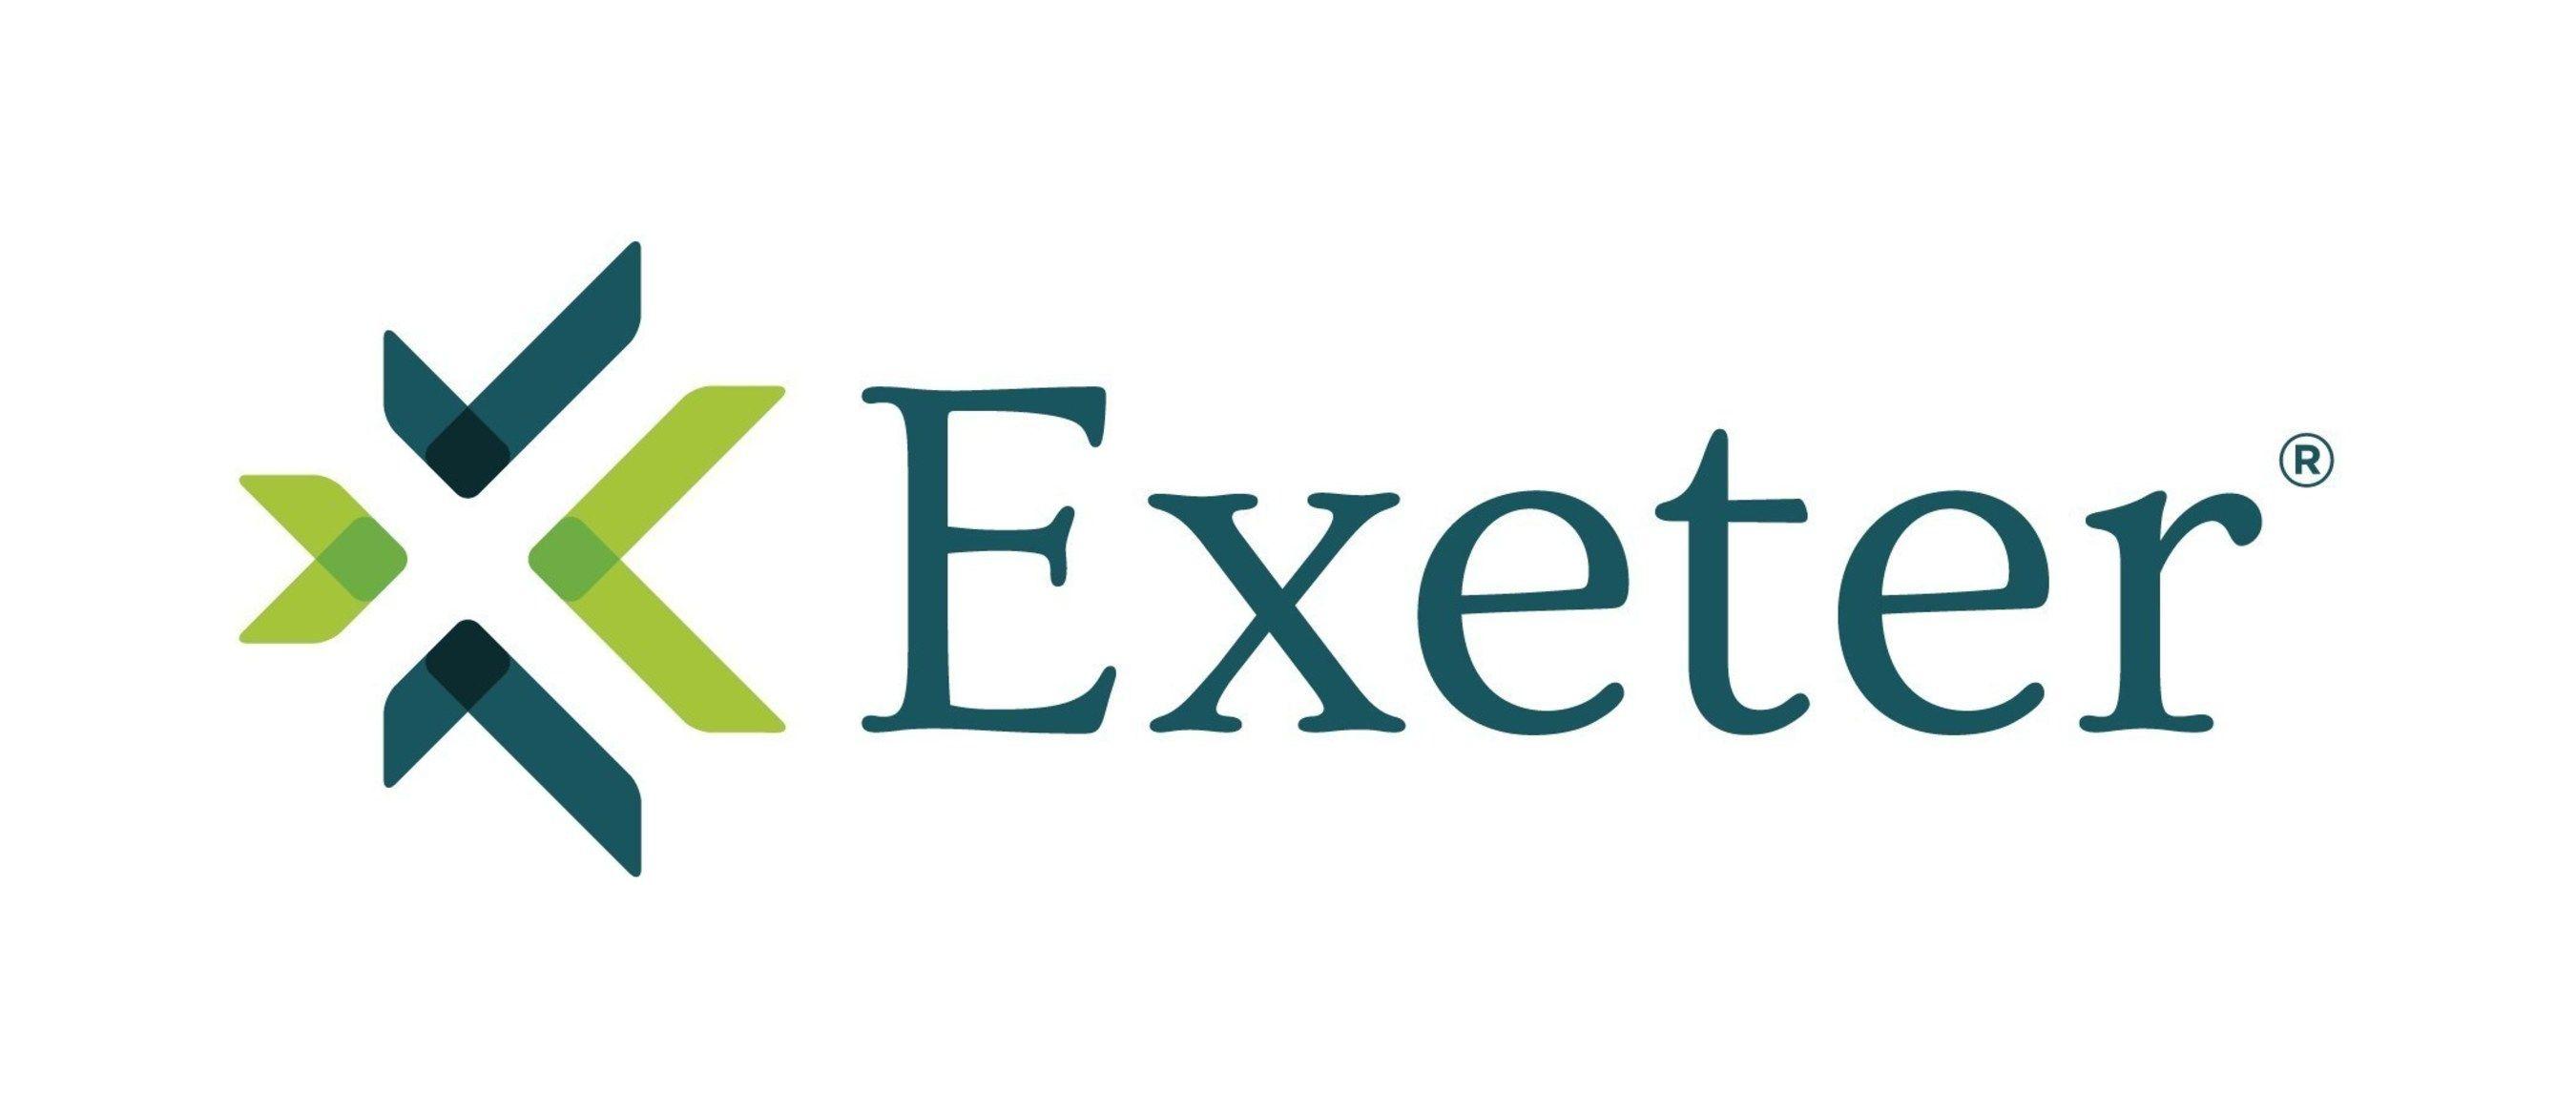 Exeter Logo - Exeter Finance Corp. Announces Rebranding With New Company Logo